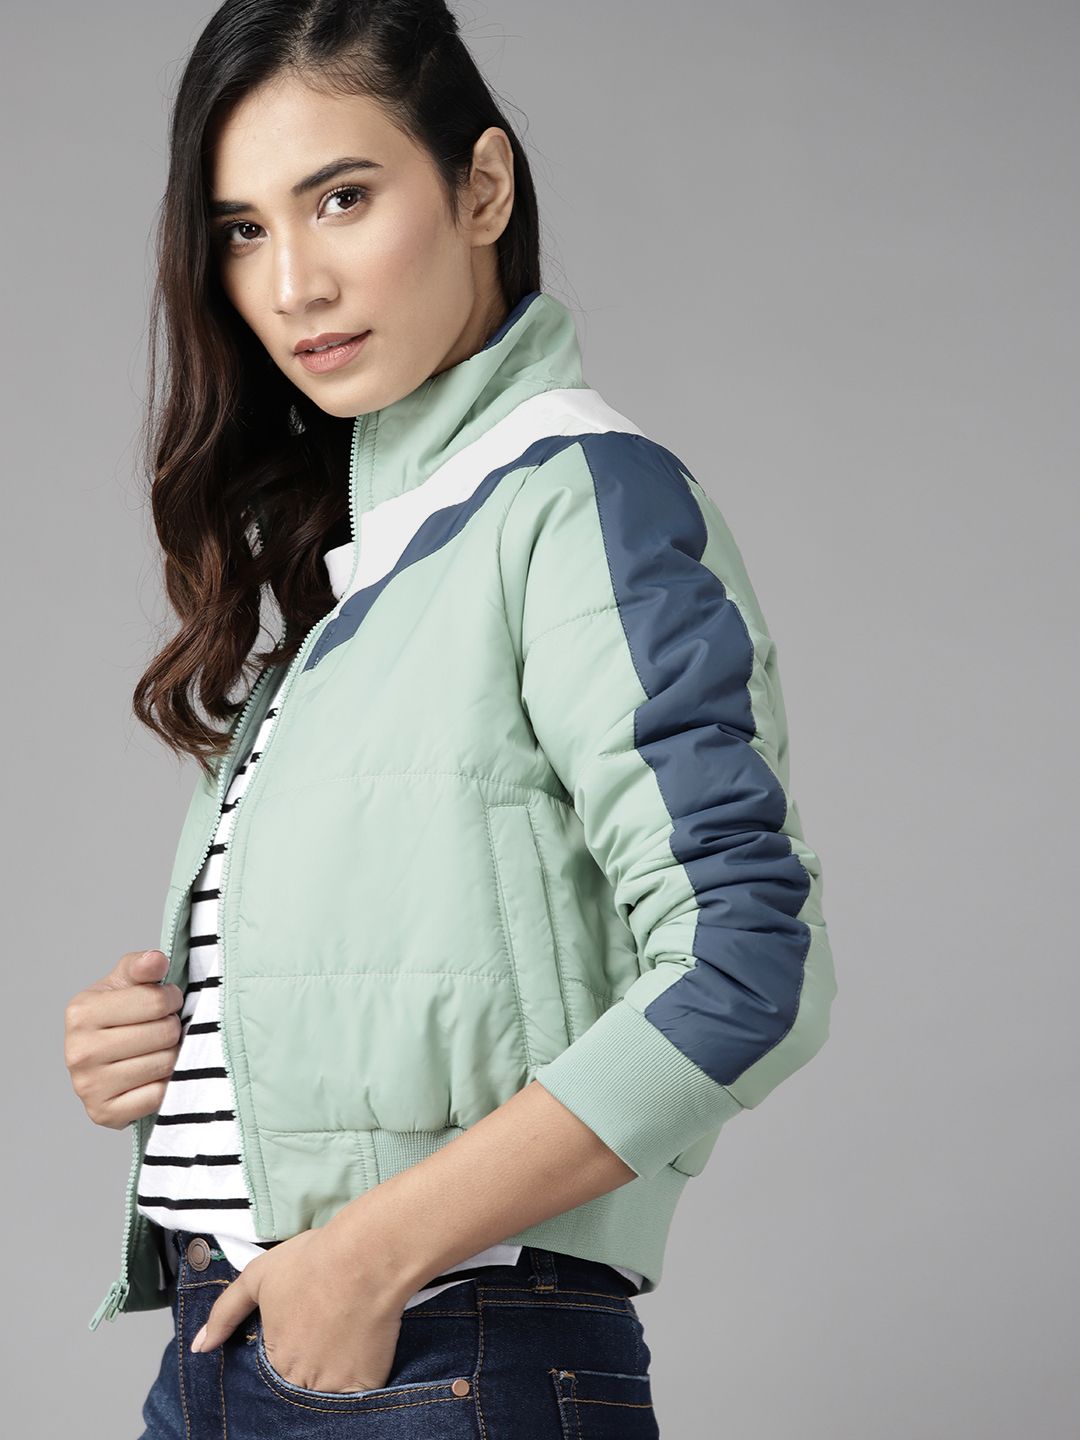 Roadster Women Green White Striped Bomber Jacket Price in India